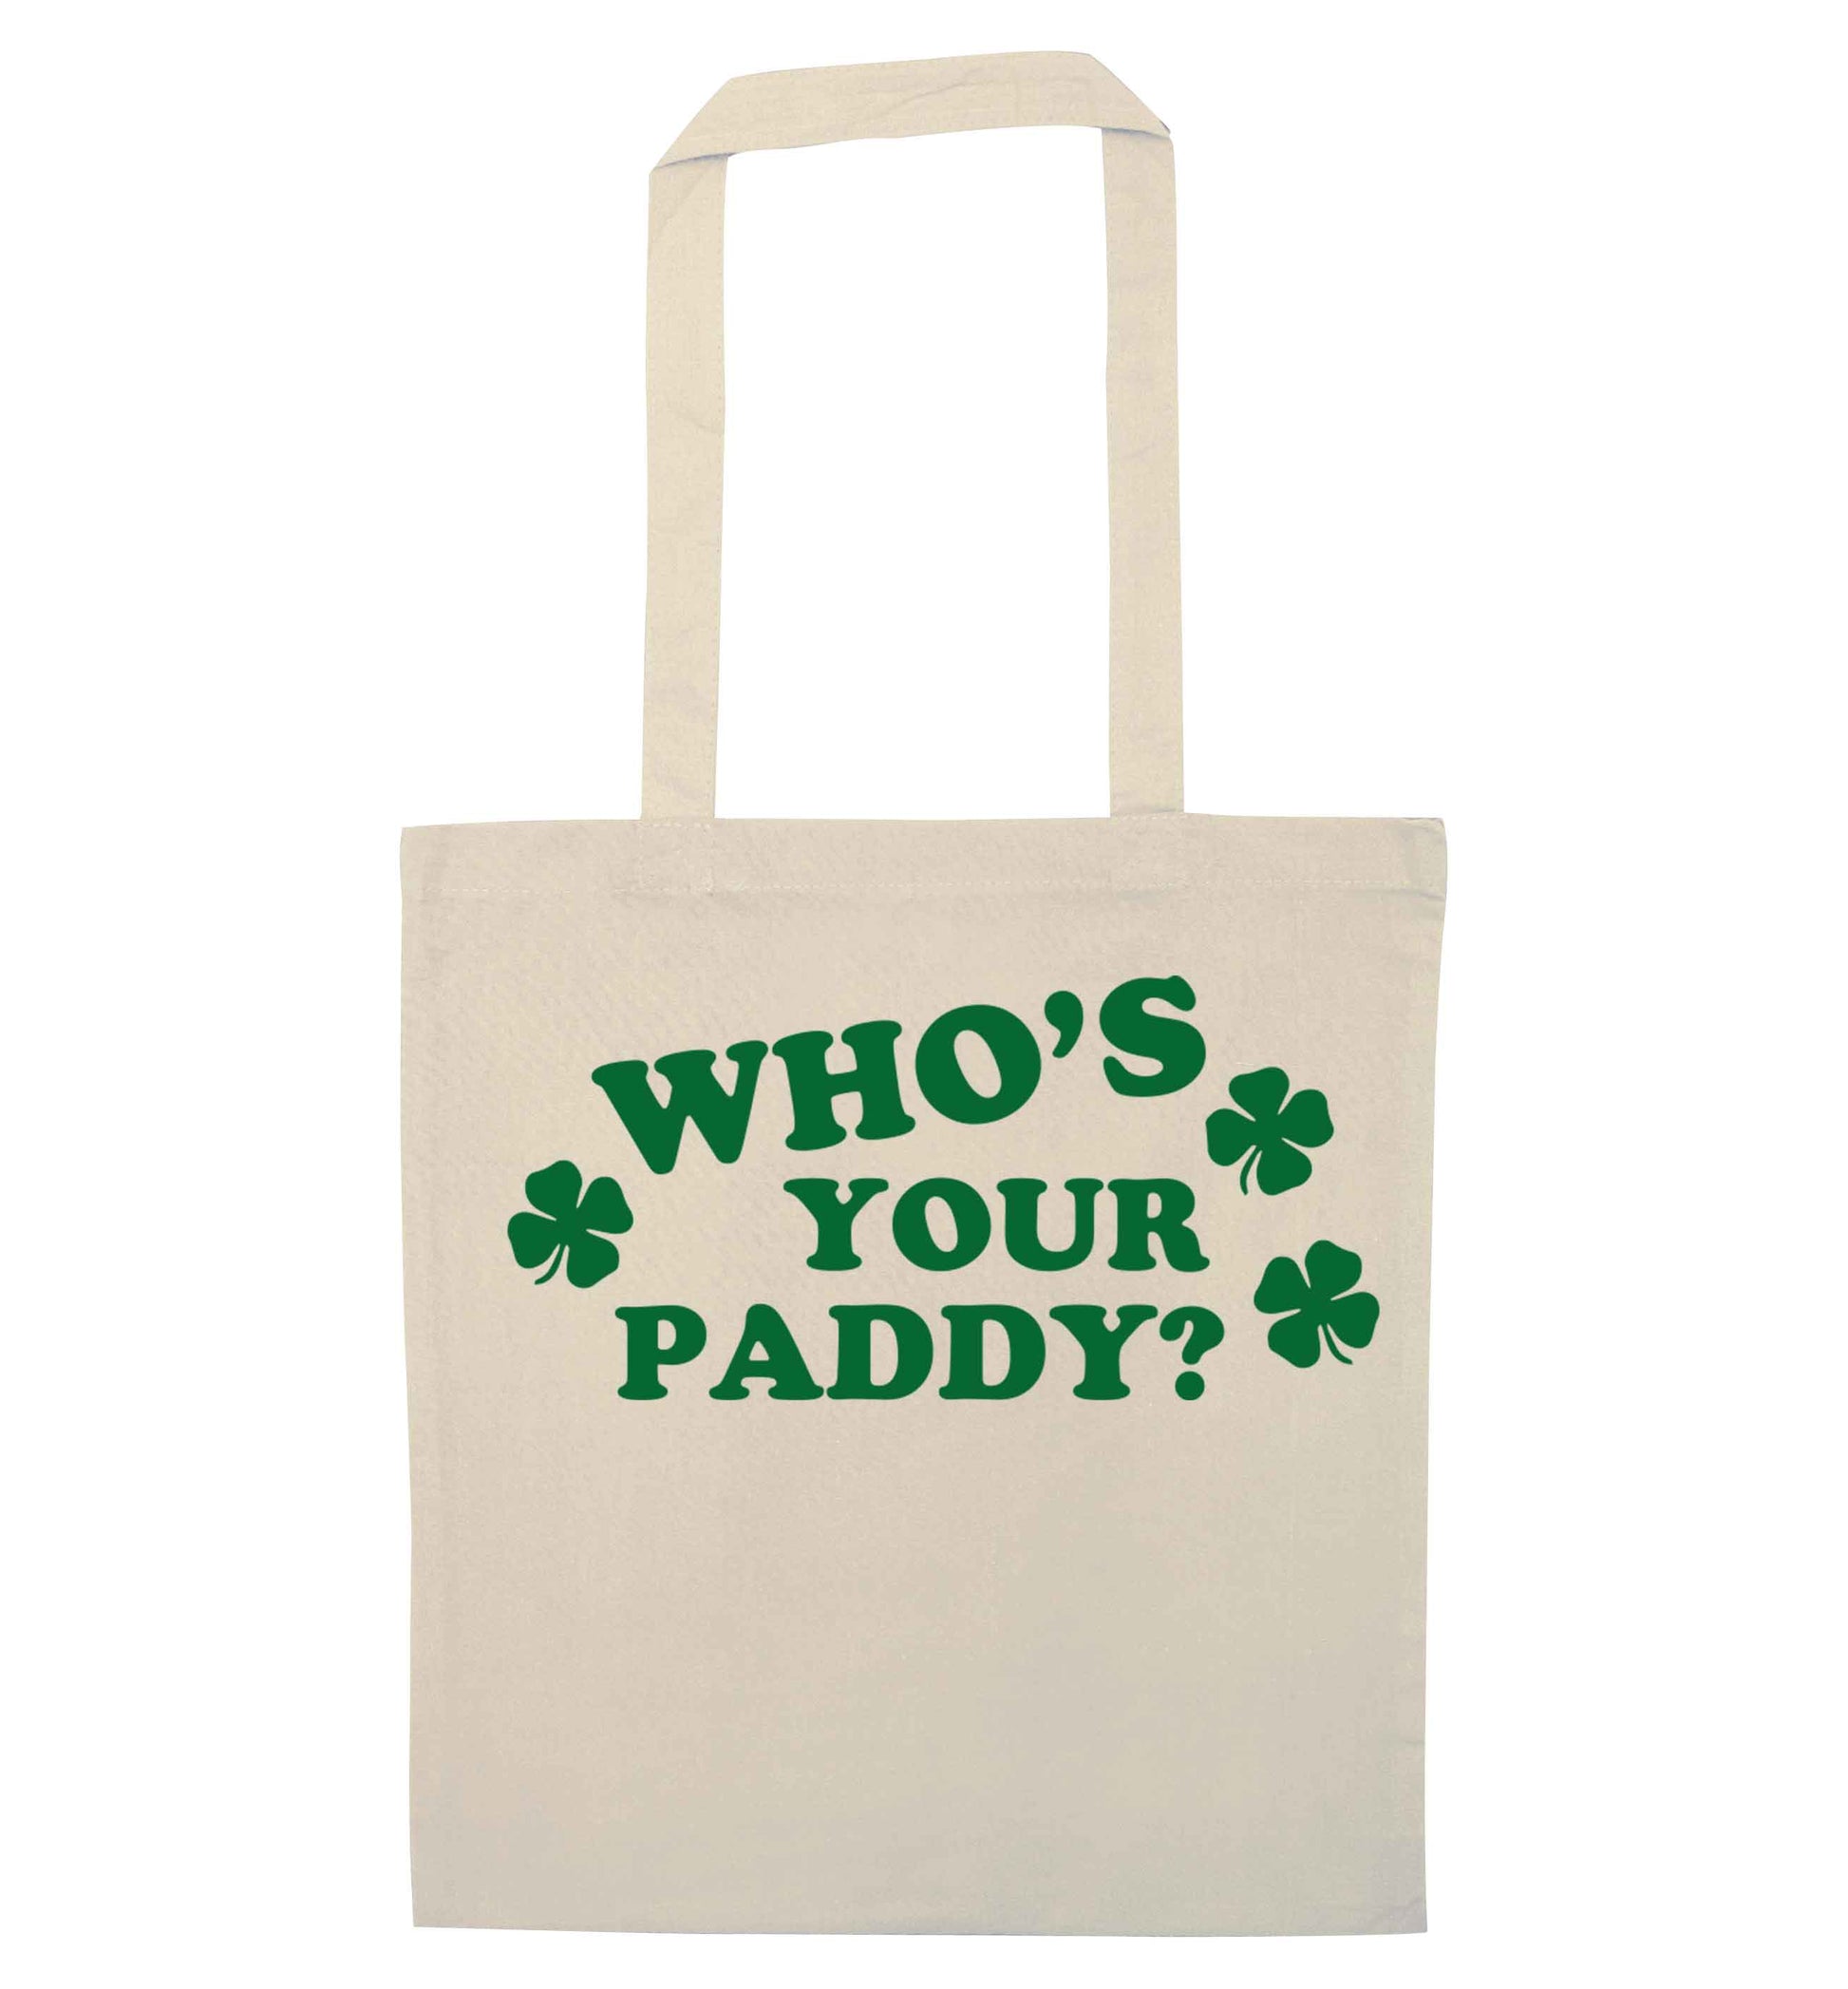 Who's your paddy? natural tote bag